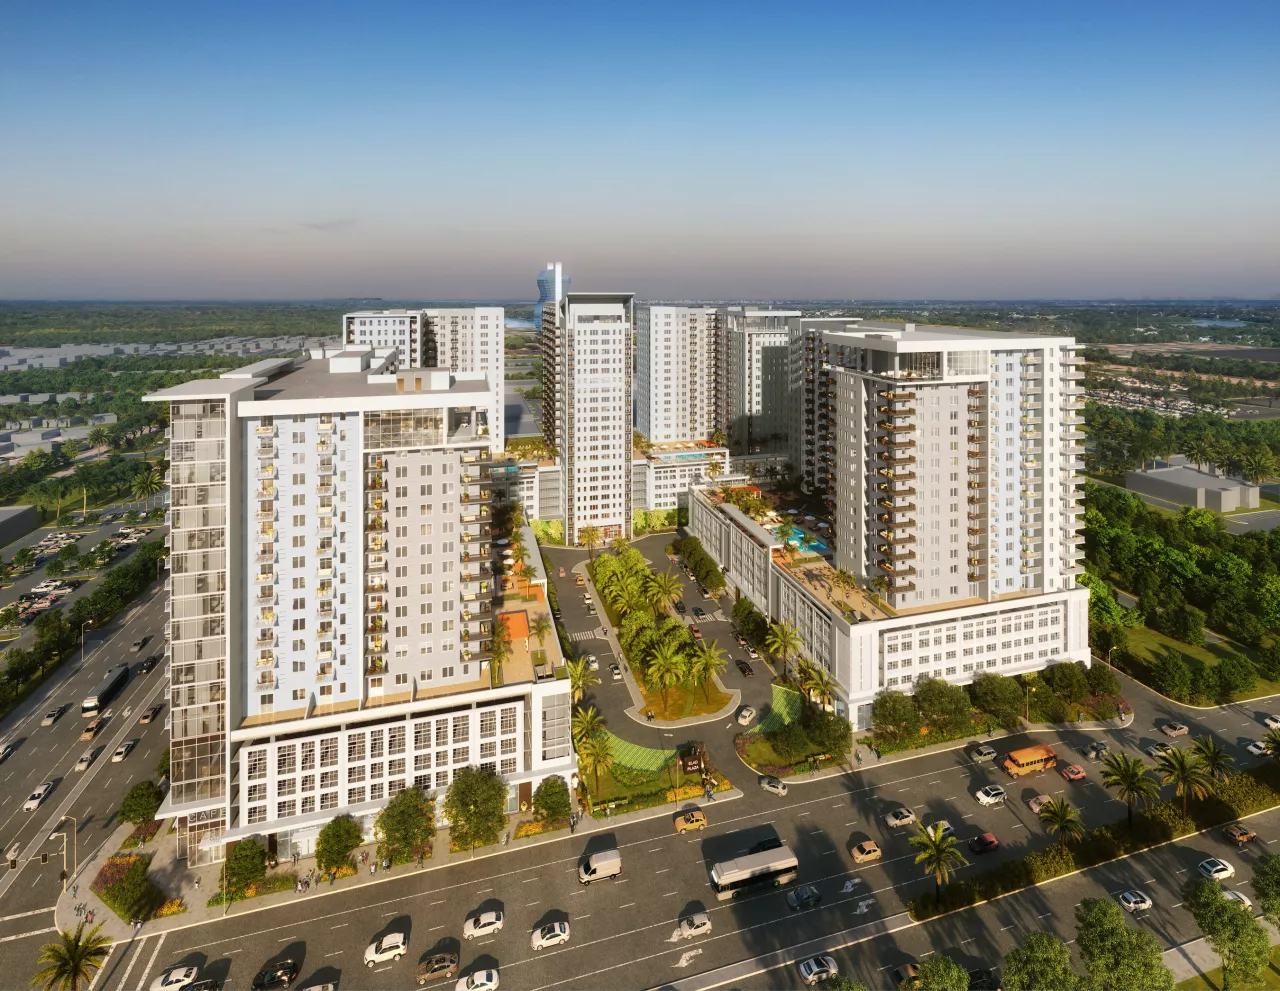 El-Ad National Properties Unveils Plans for The District in Davie, a Vibrant 2.8 Million-Square-Foot Rental Residential Apartment,